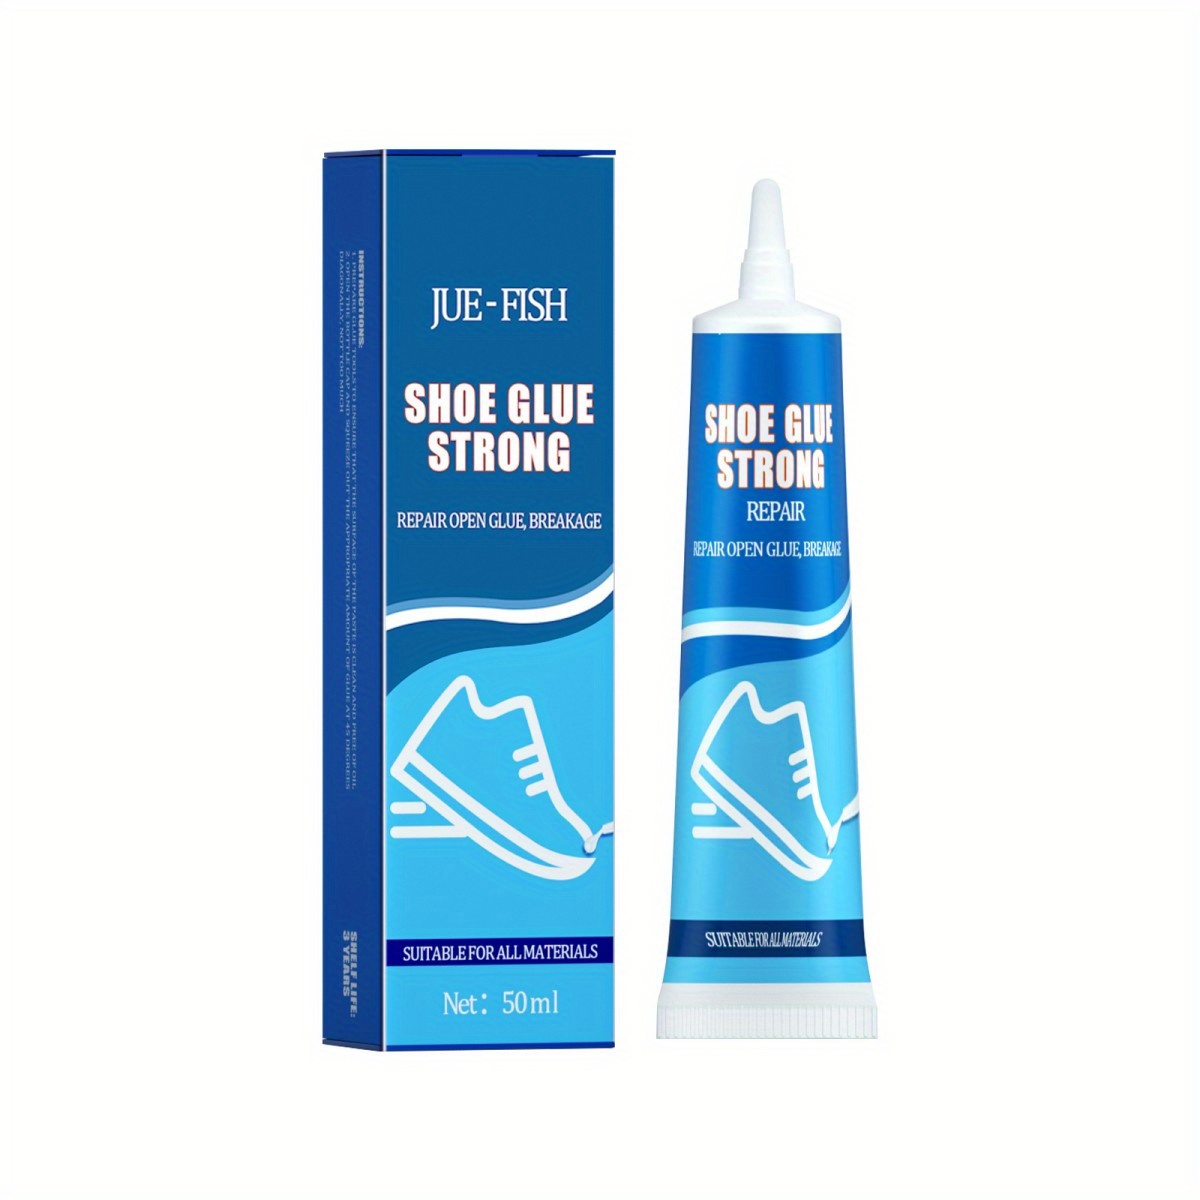 

Jue-fish Strong Shoe Glue Repair Shoe Leather Shoe Sole Multi-purpose Adhesive Sports Shoe Leather Waterproof